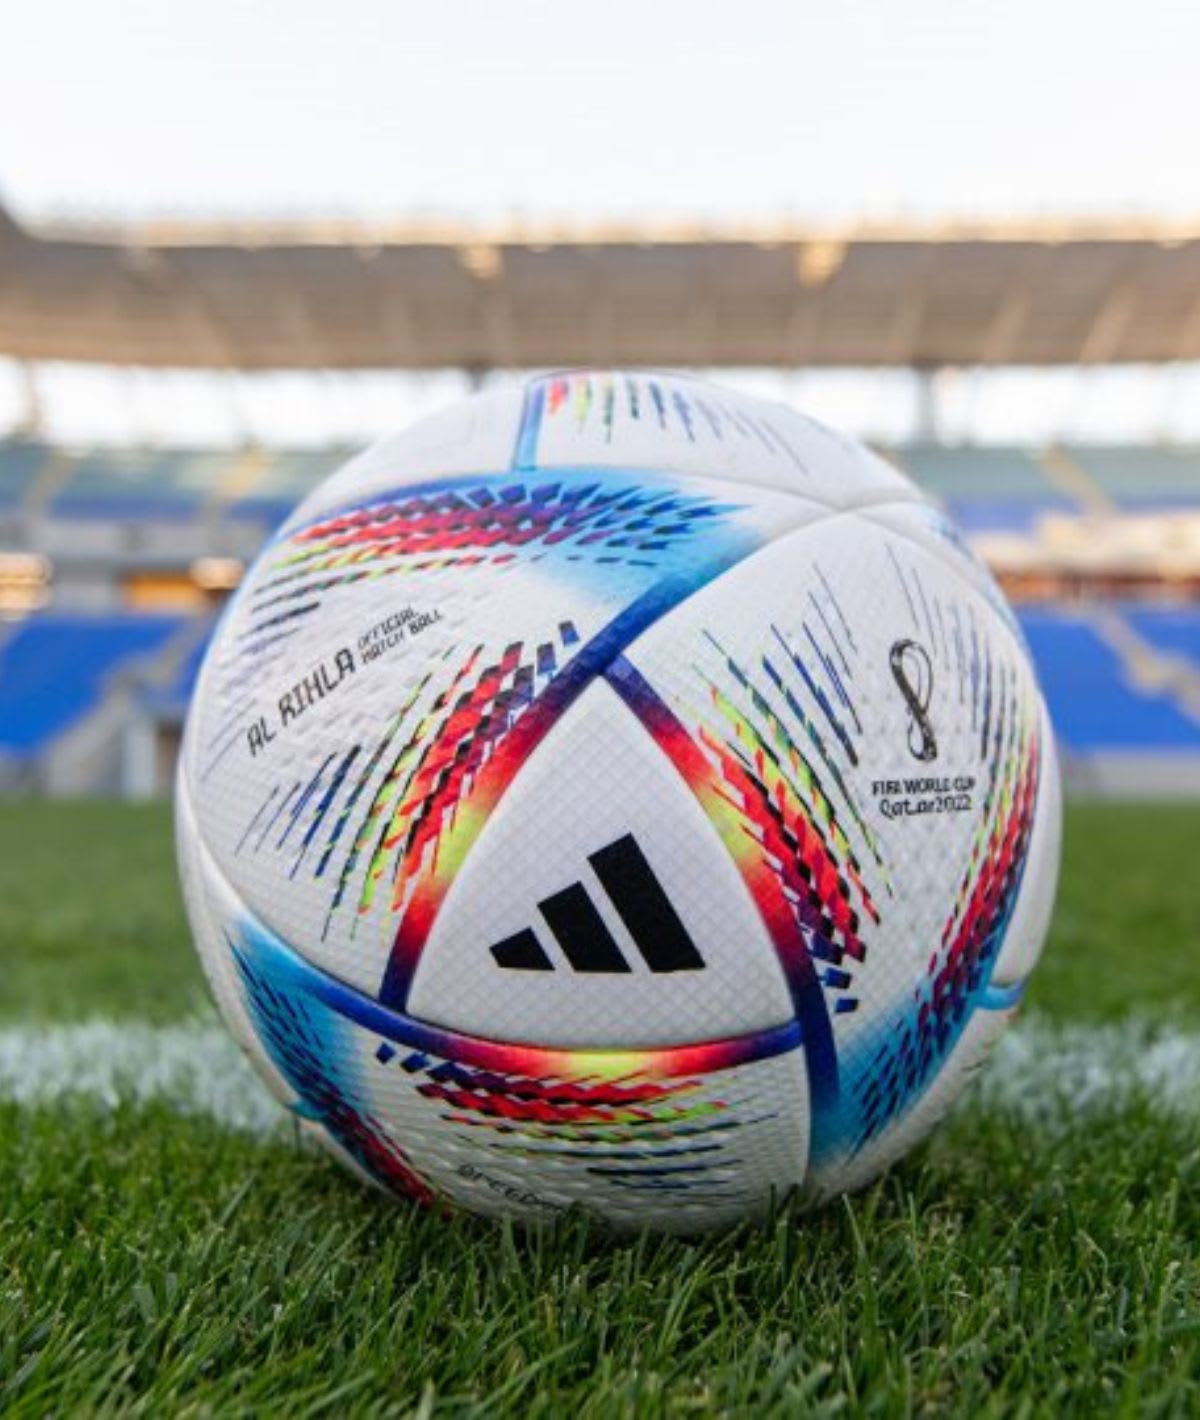 adidas reveals the first FIFA World Cup™ official match ball featuring  connected ball technology